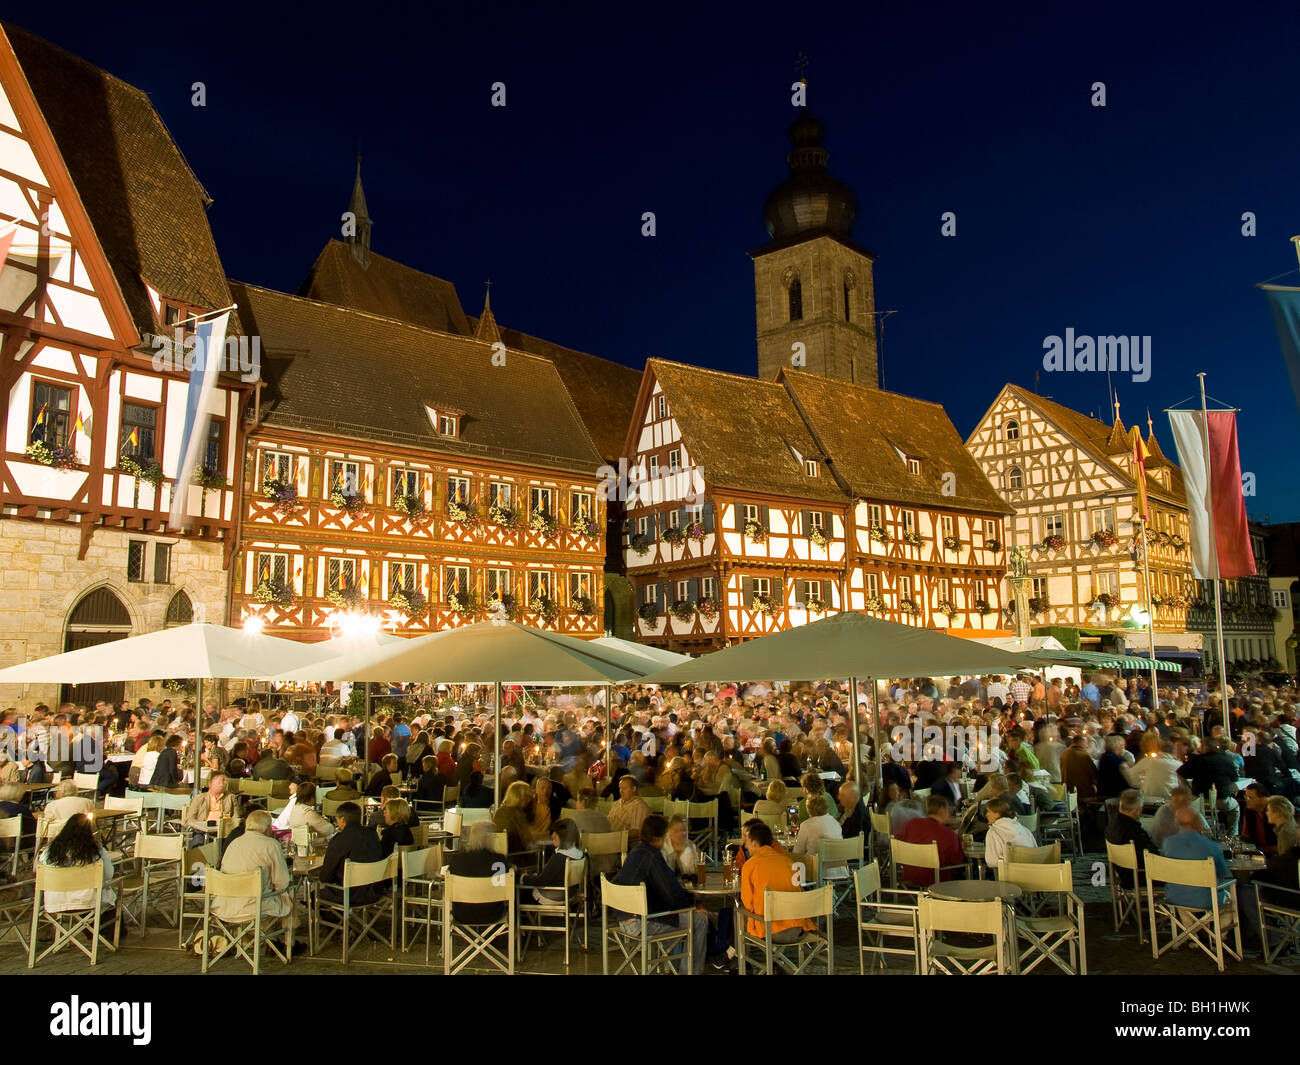 Festival in the old part of town, Forchheim, Franconia, Germany Stock Photo